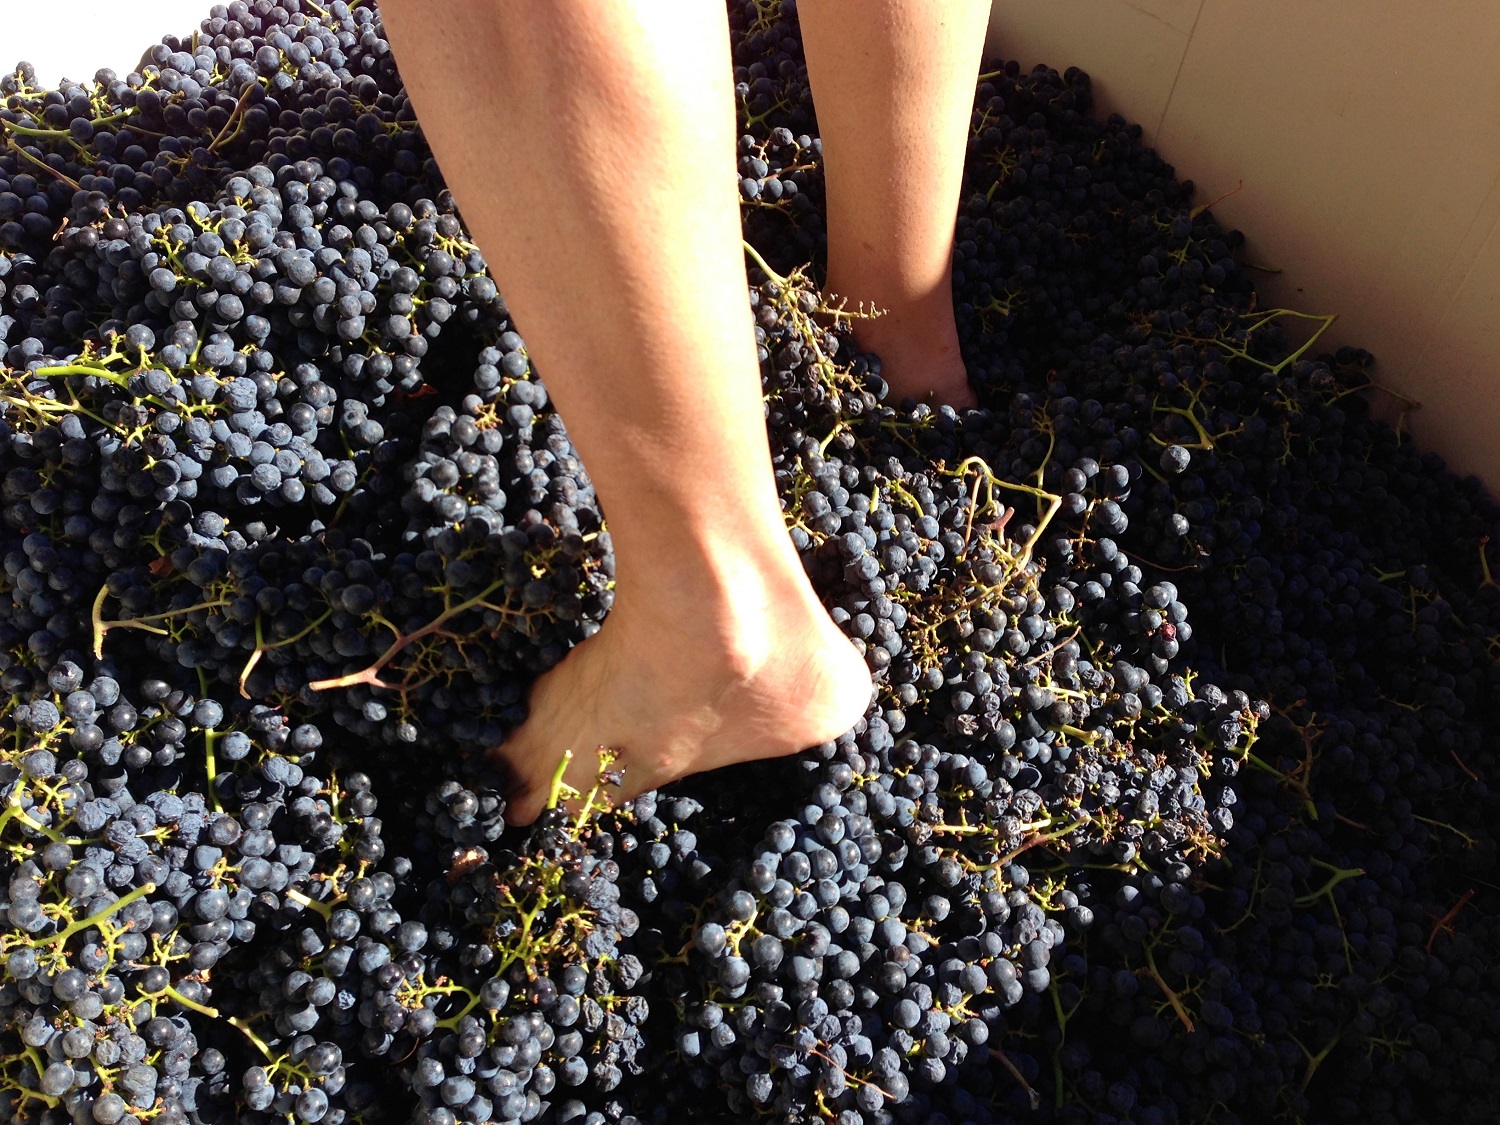 Stomping Merlot grapes after the grape harvest